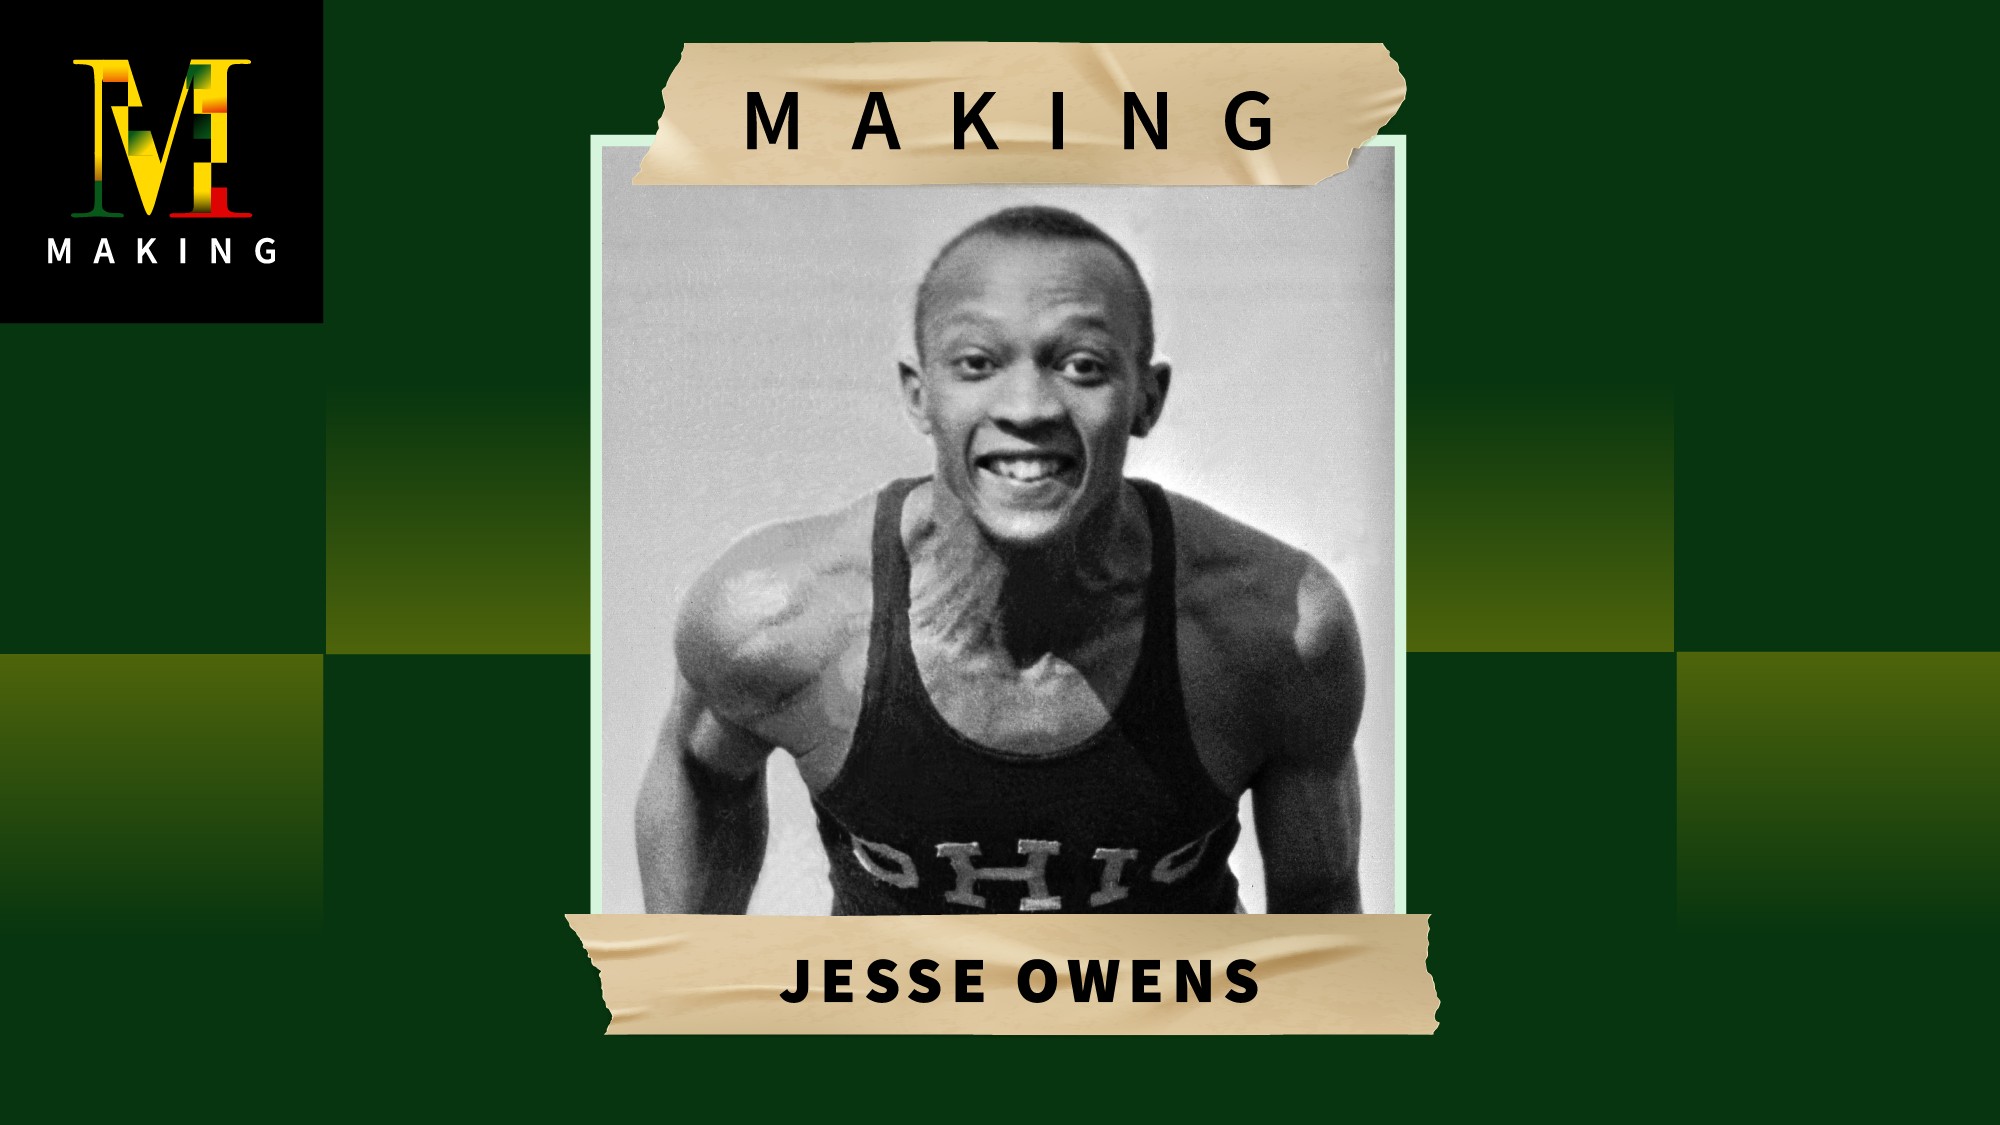 Jesse Owens faced both glory and hardship before and after Hitler's Olympics